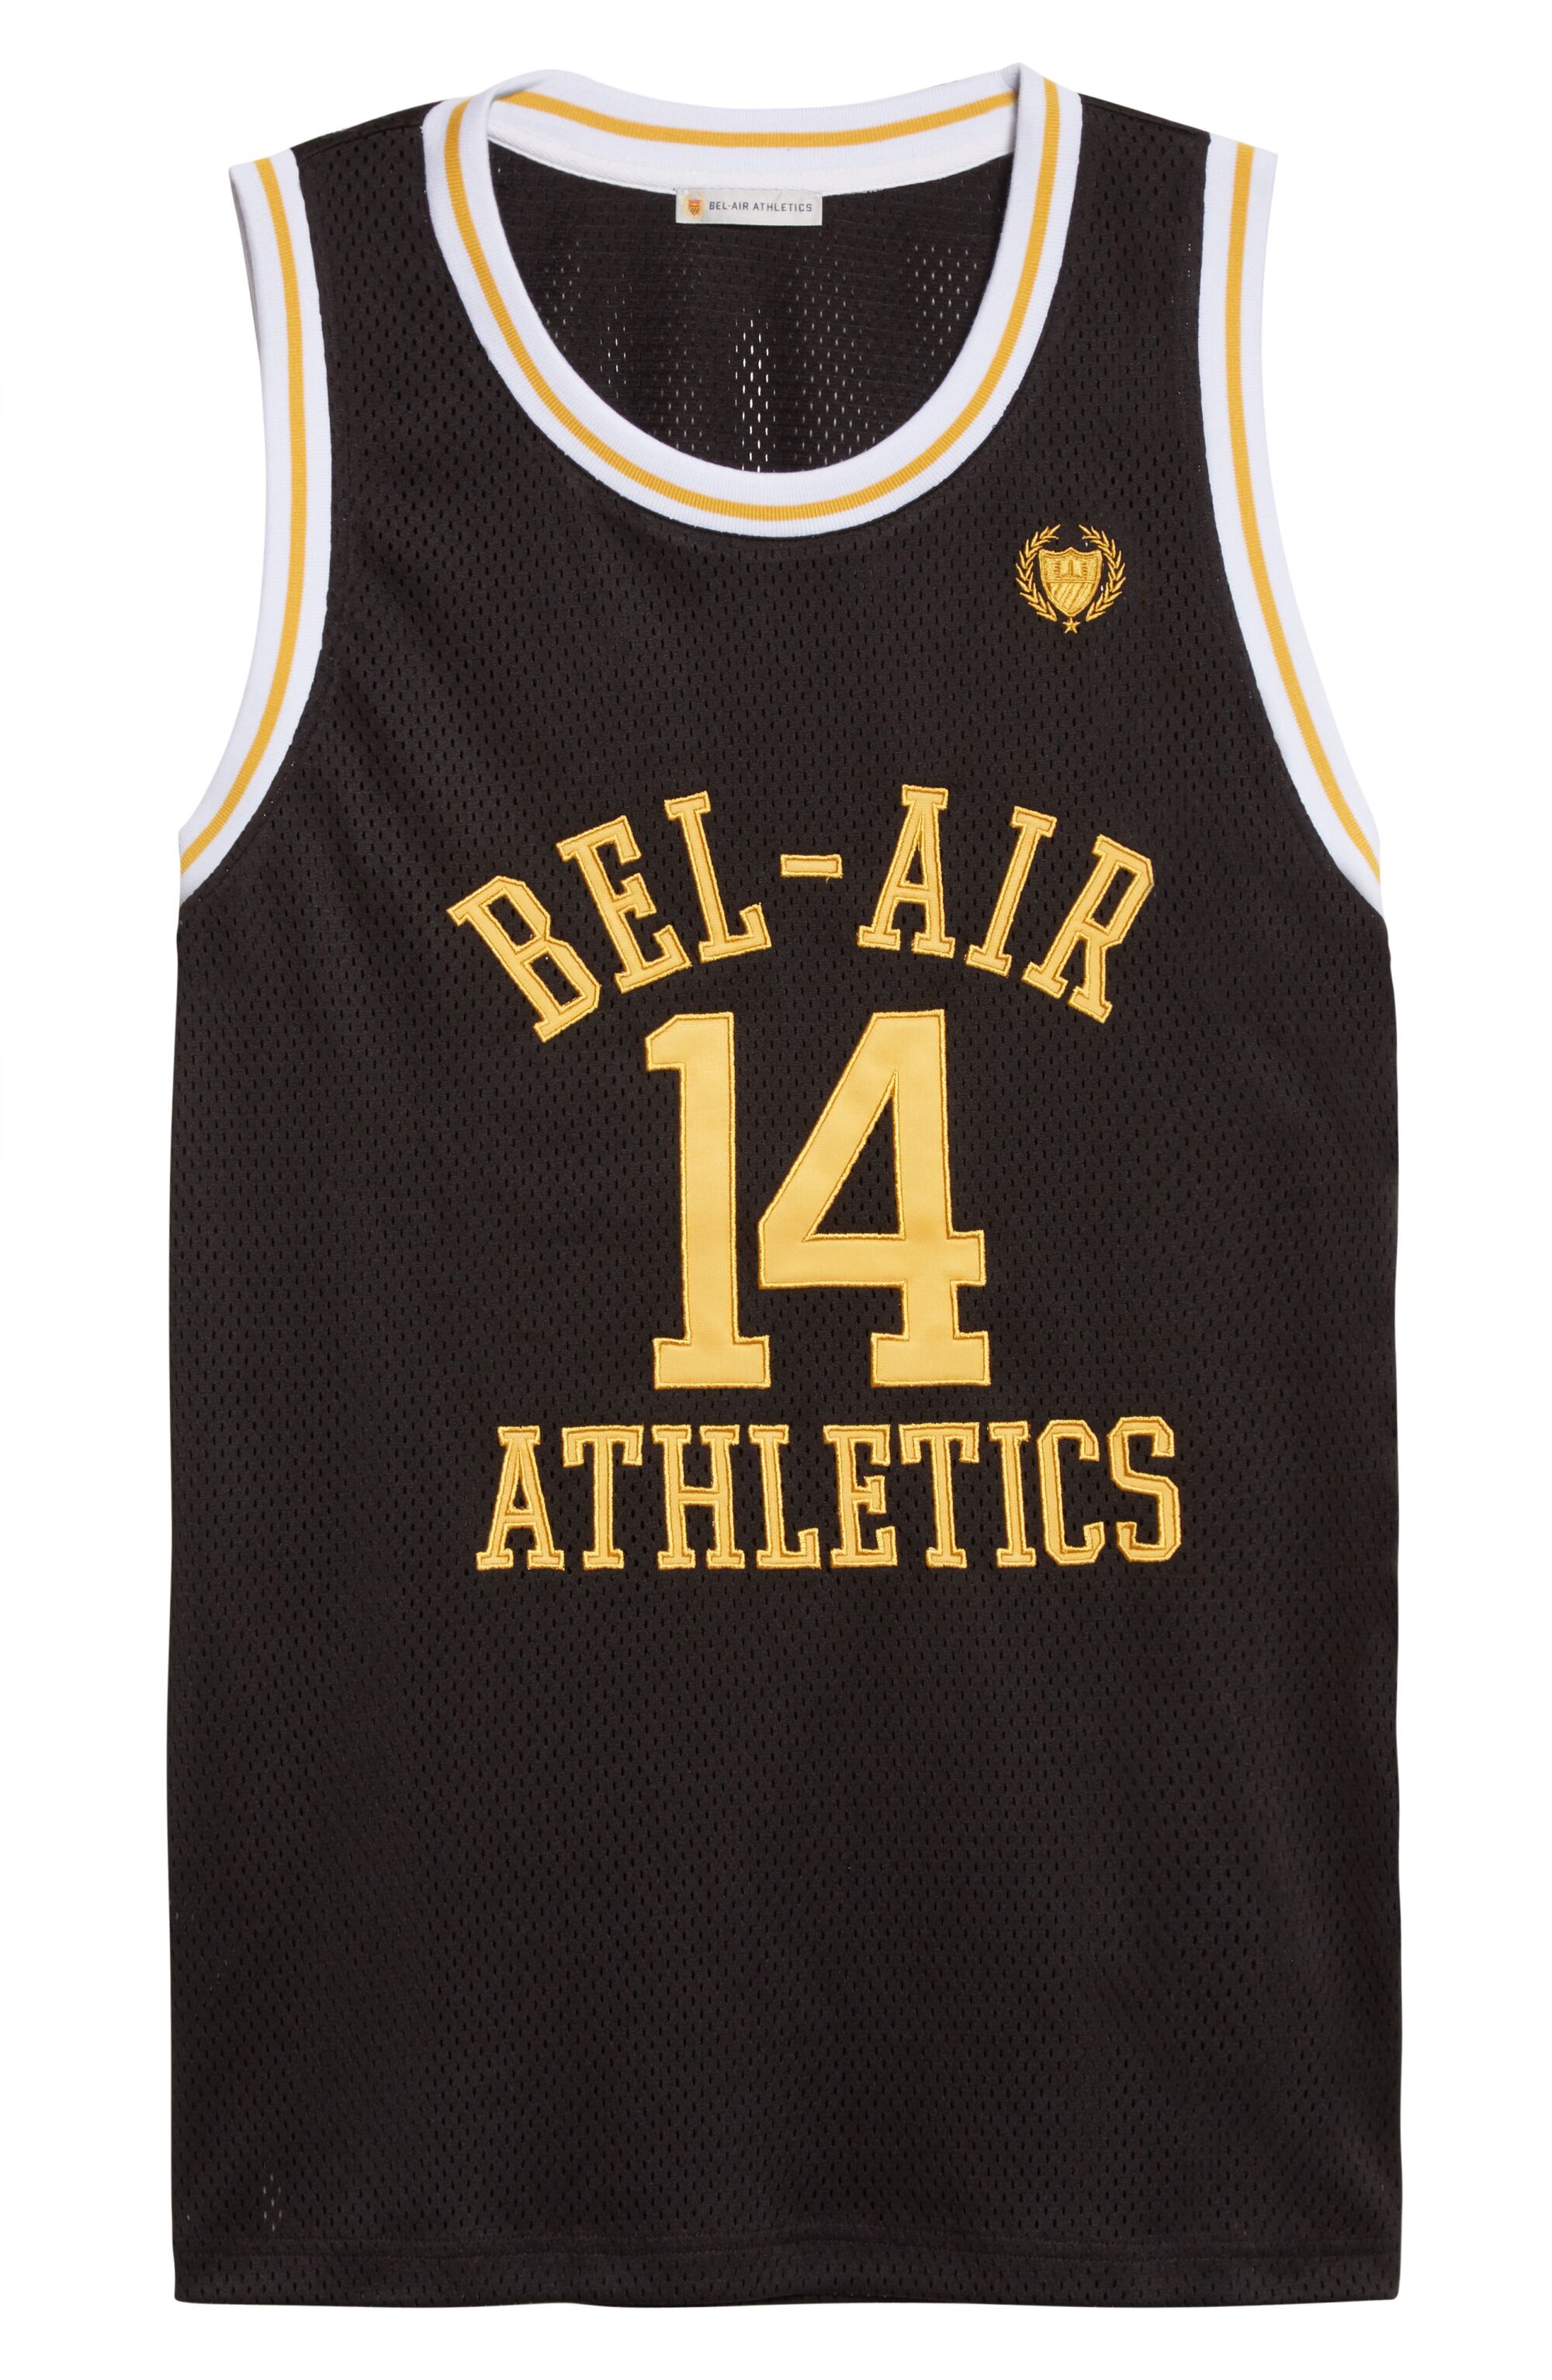 Bel-Air Athletics black jersey with yellow writing